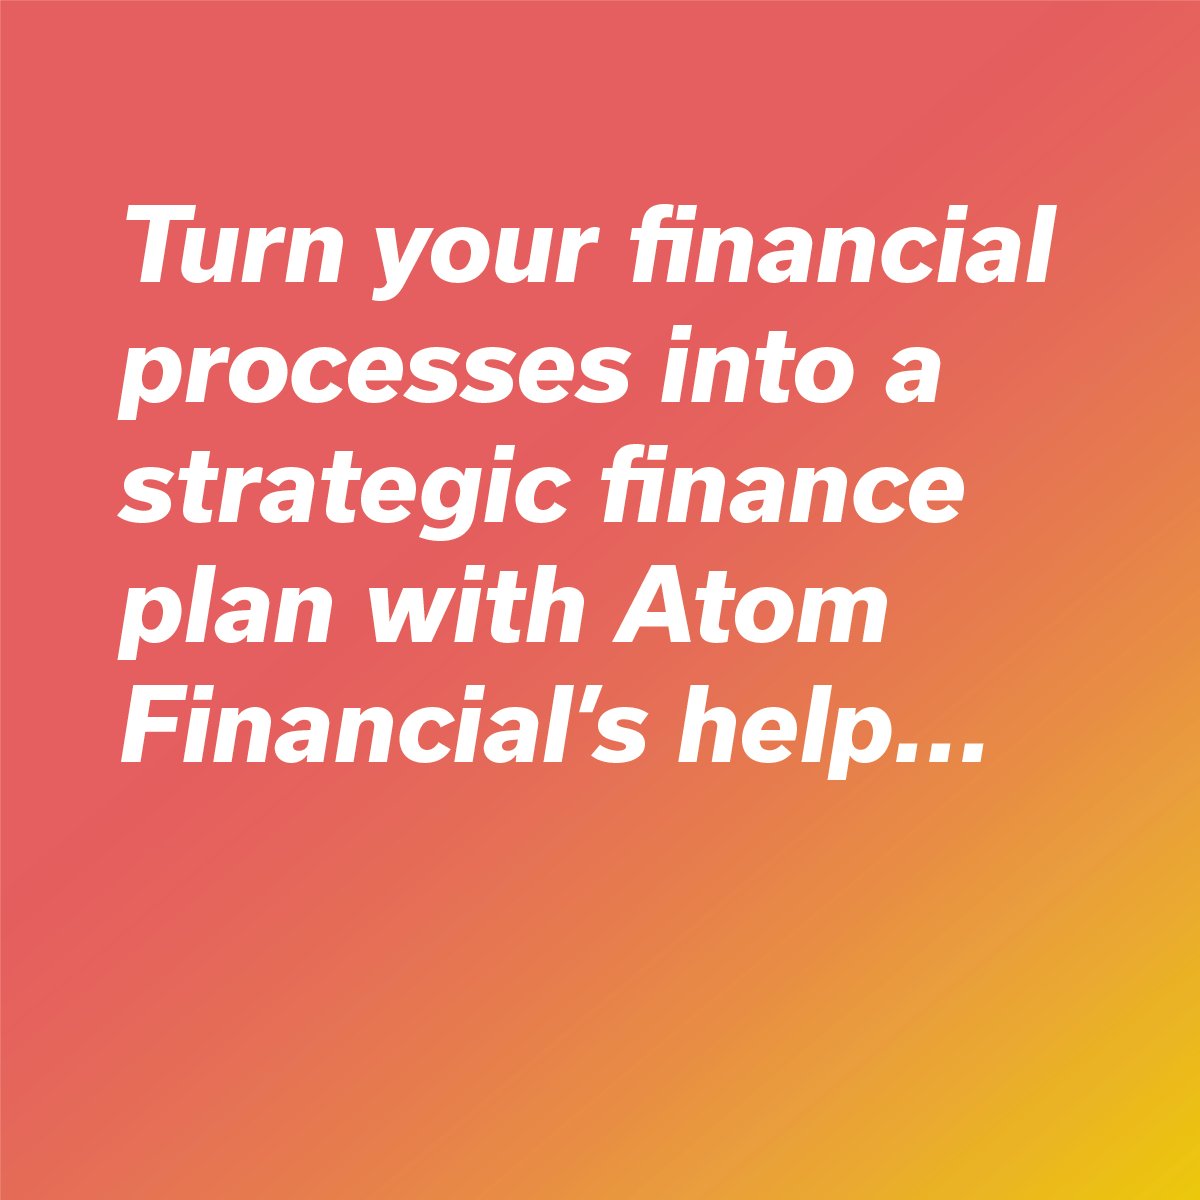 Strategic planning is required to decide your organisation’s direction. That’s where we come in: Atom Financial’s experienced team can turn your financial processes into a strategic finance plan. bit.ly/3s67SGN #OutsourcedFinance